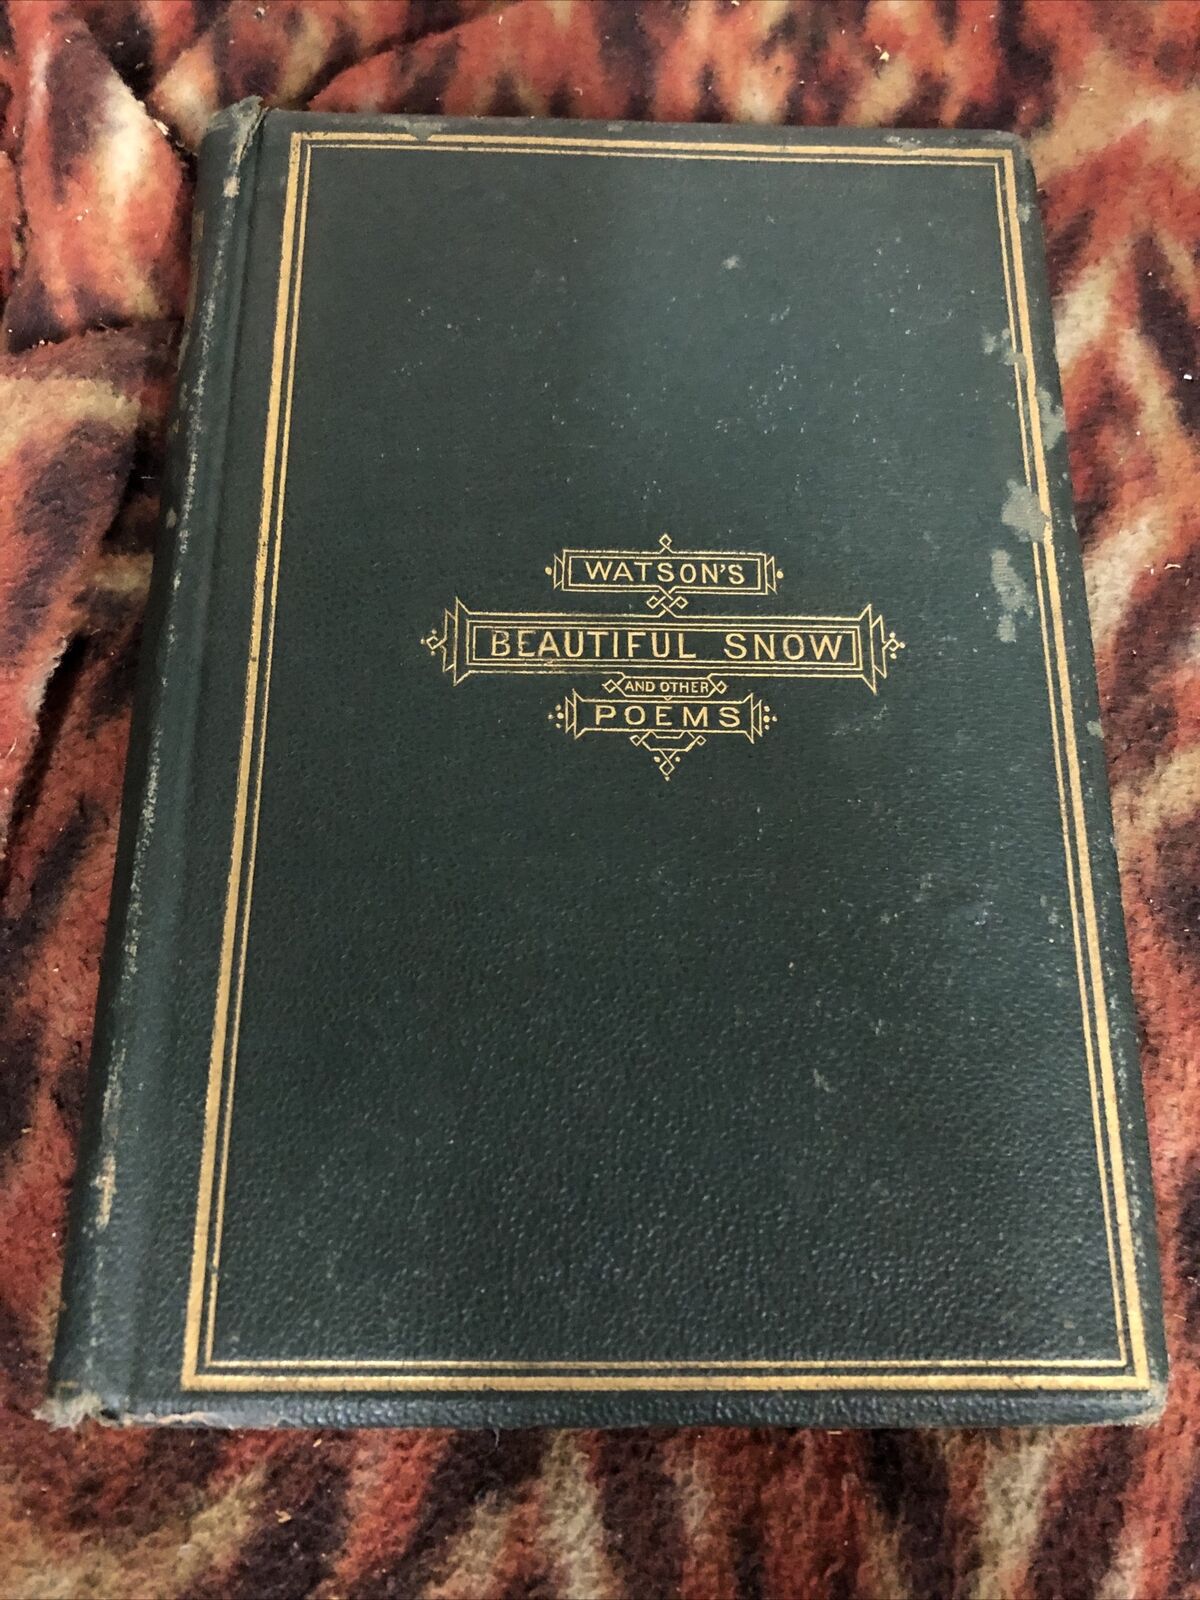 Beautiful Snow and Other Poems by J W Watson Hardcover Book Antique Collect 1871